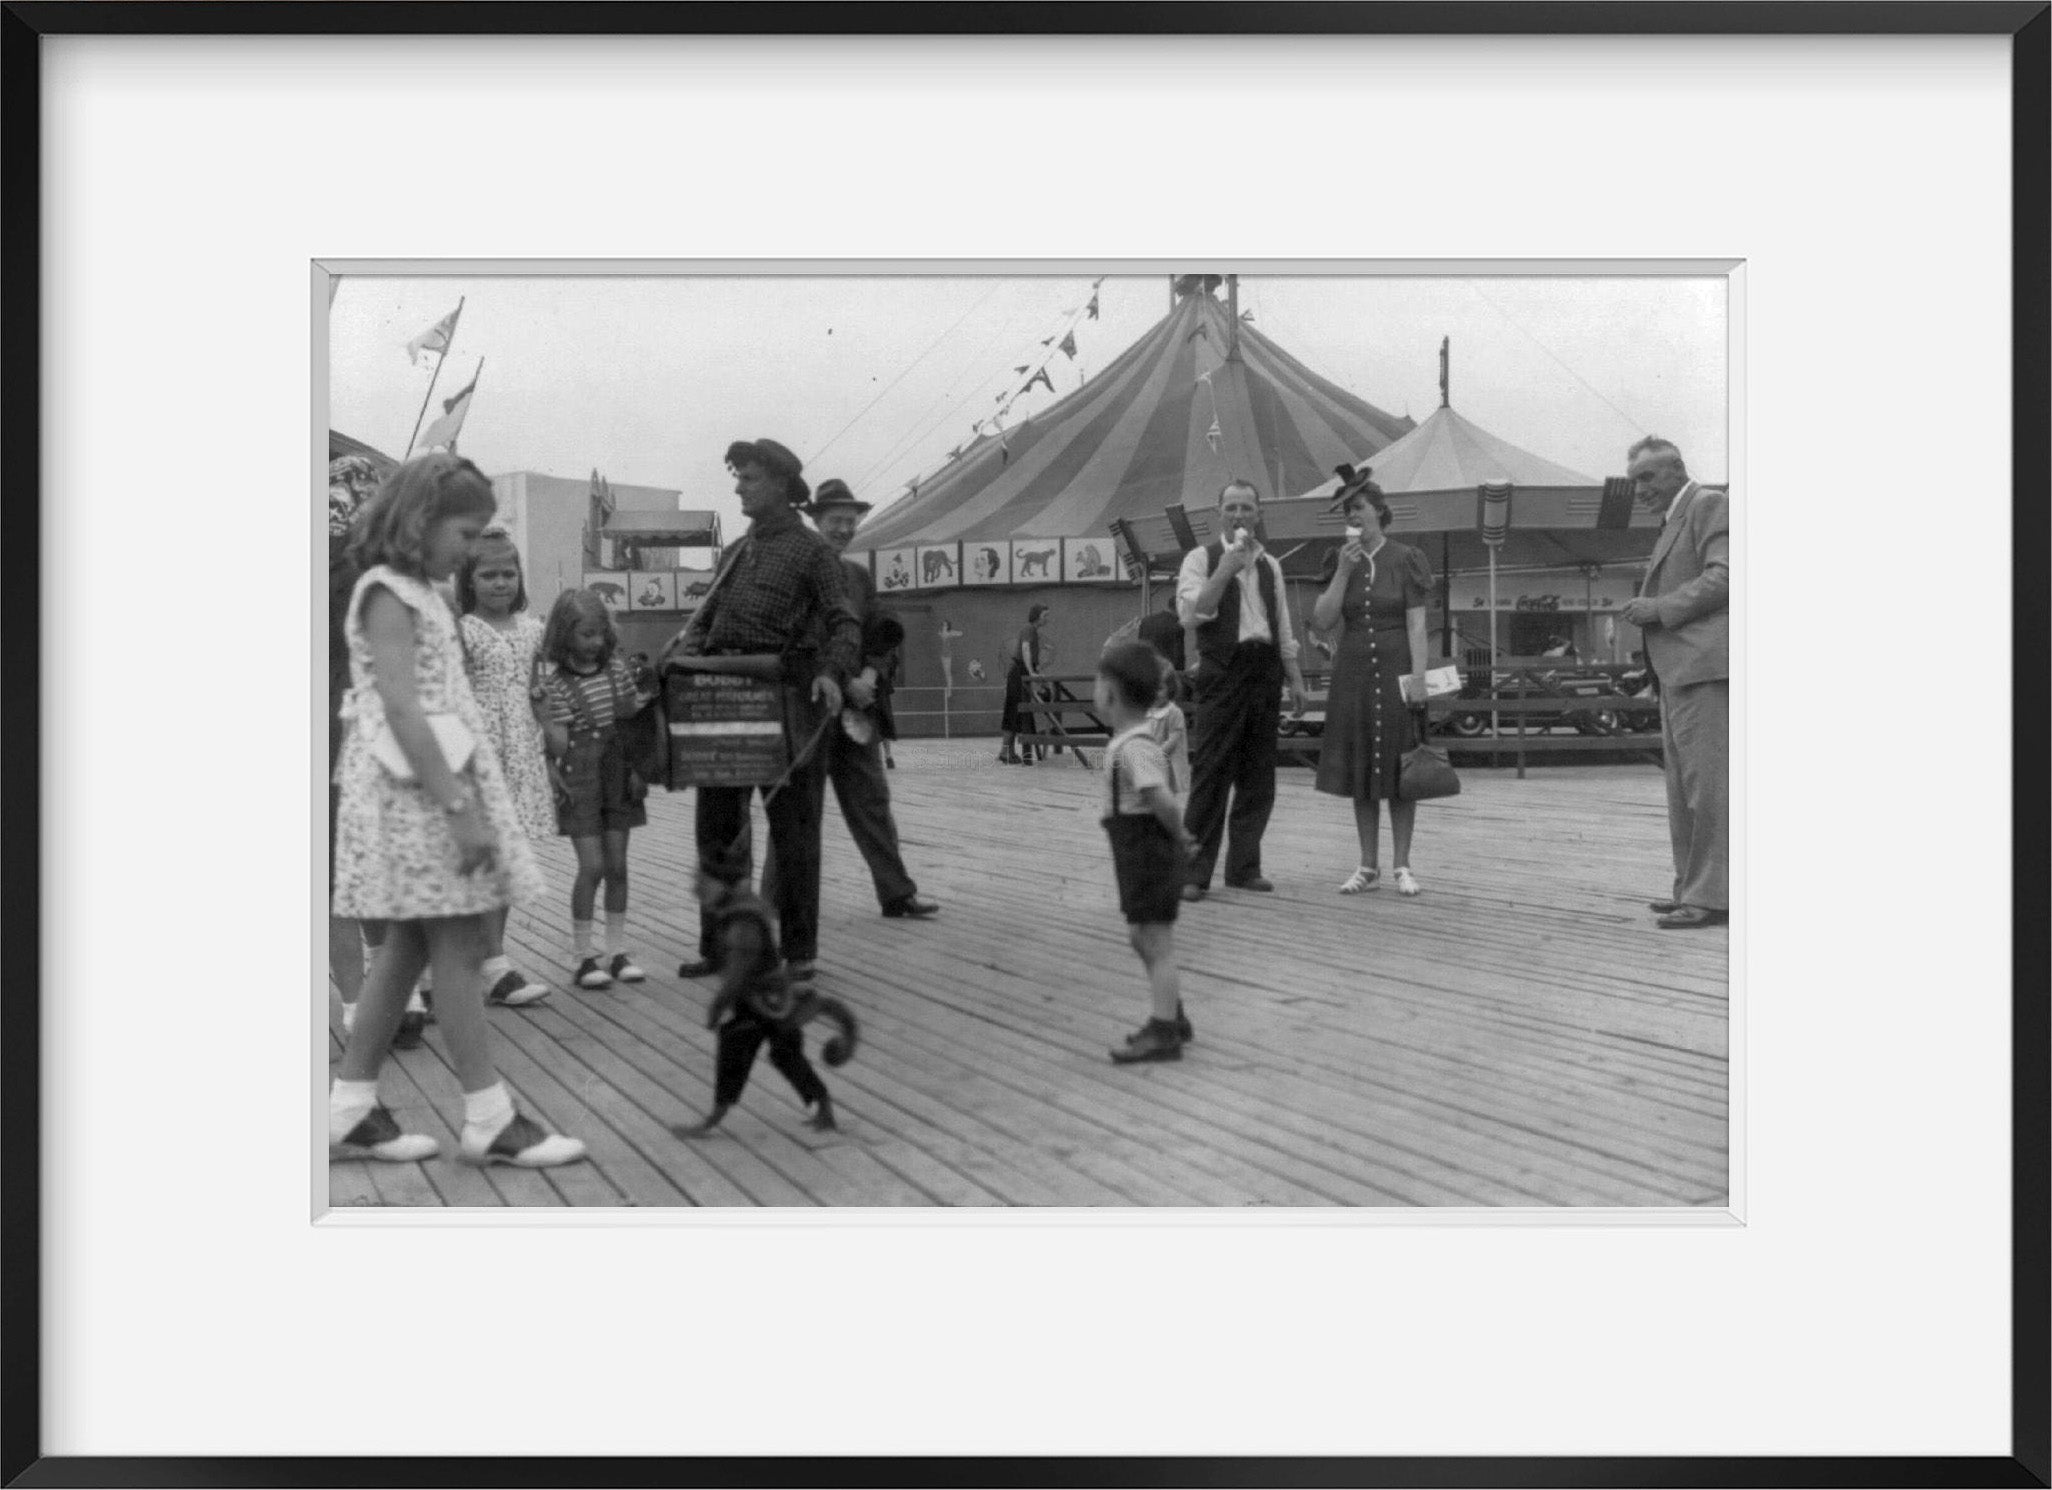 1939 photograph of New York World's Fair: Organ grinder and monkey on midway